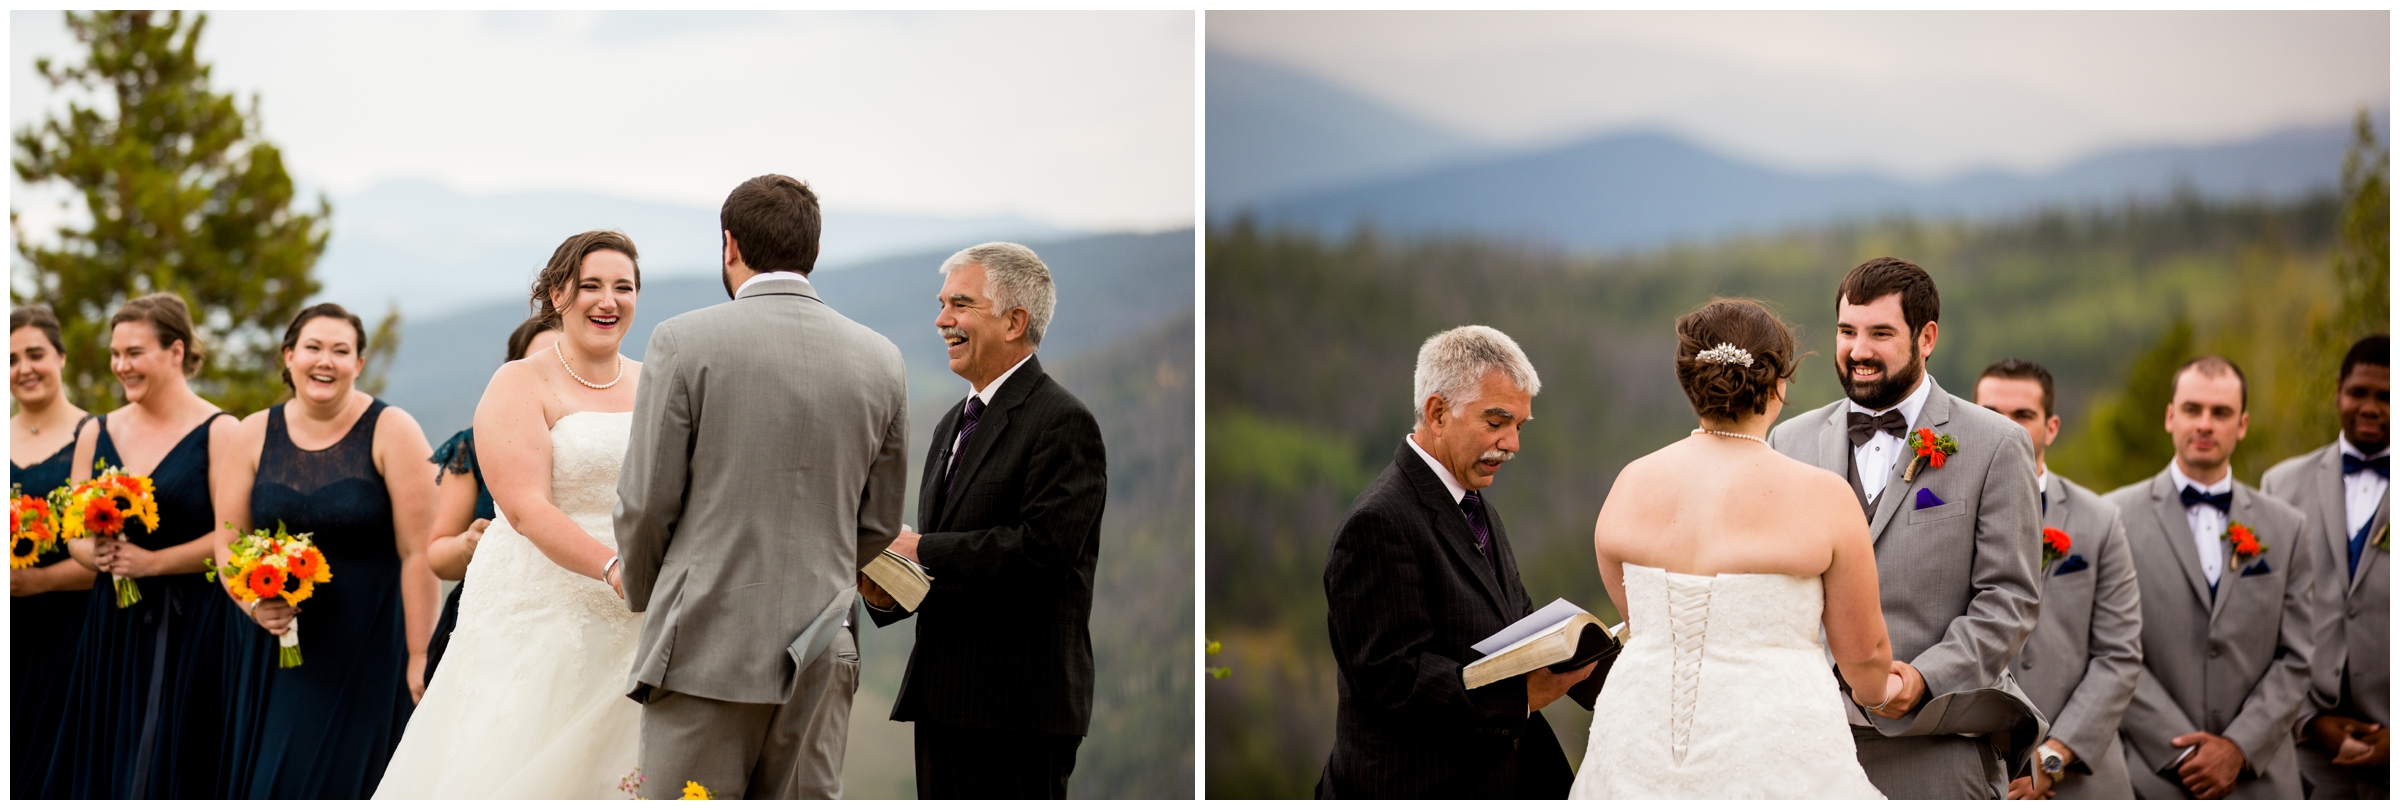 couple saying vows during Granby outdoor wedding ceremony 